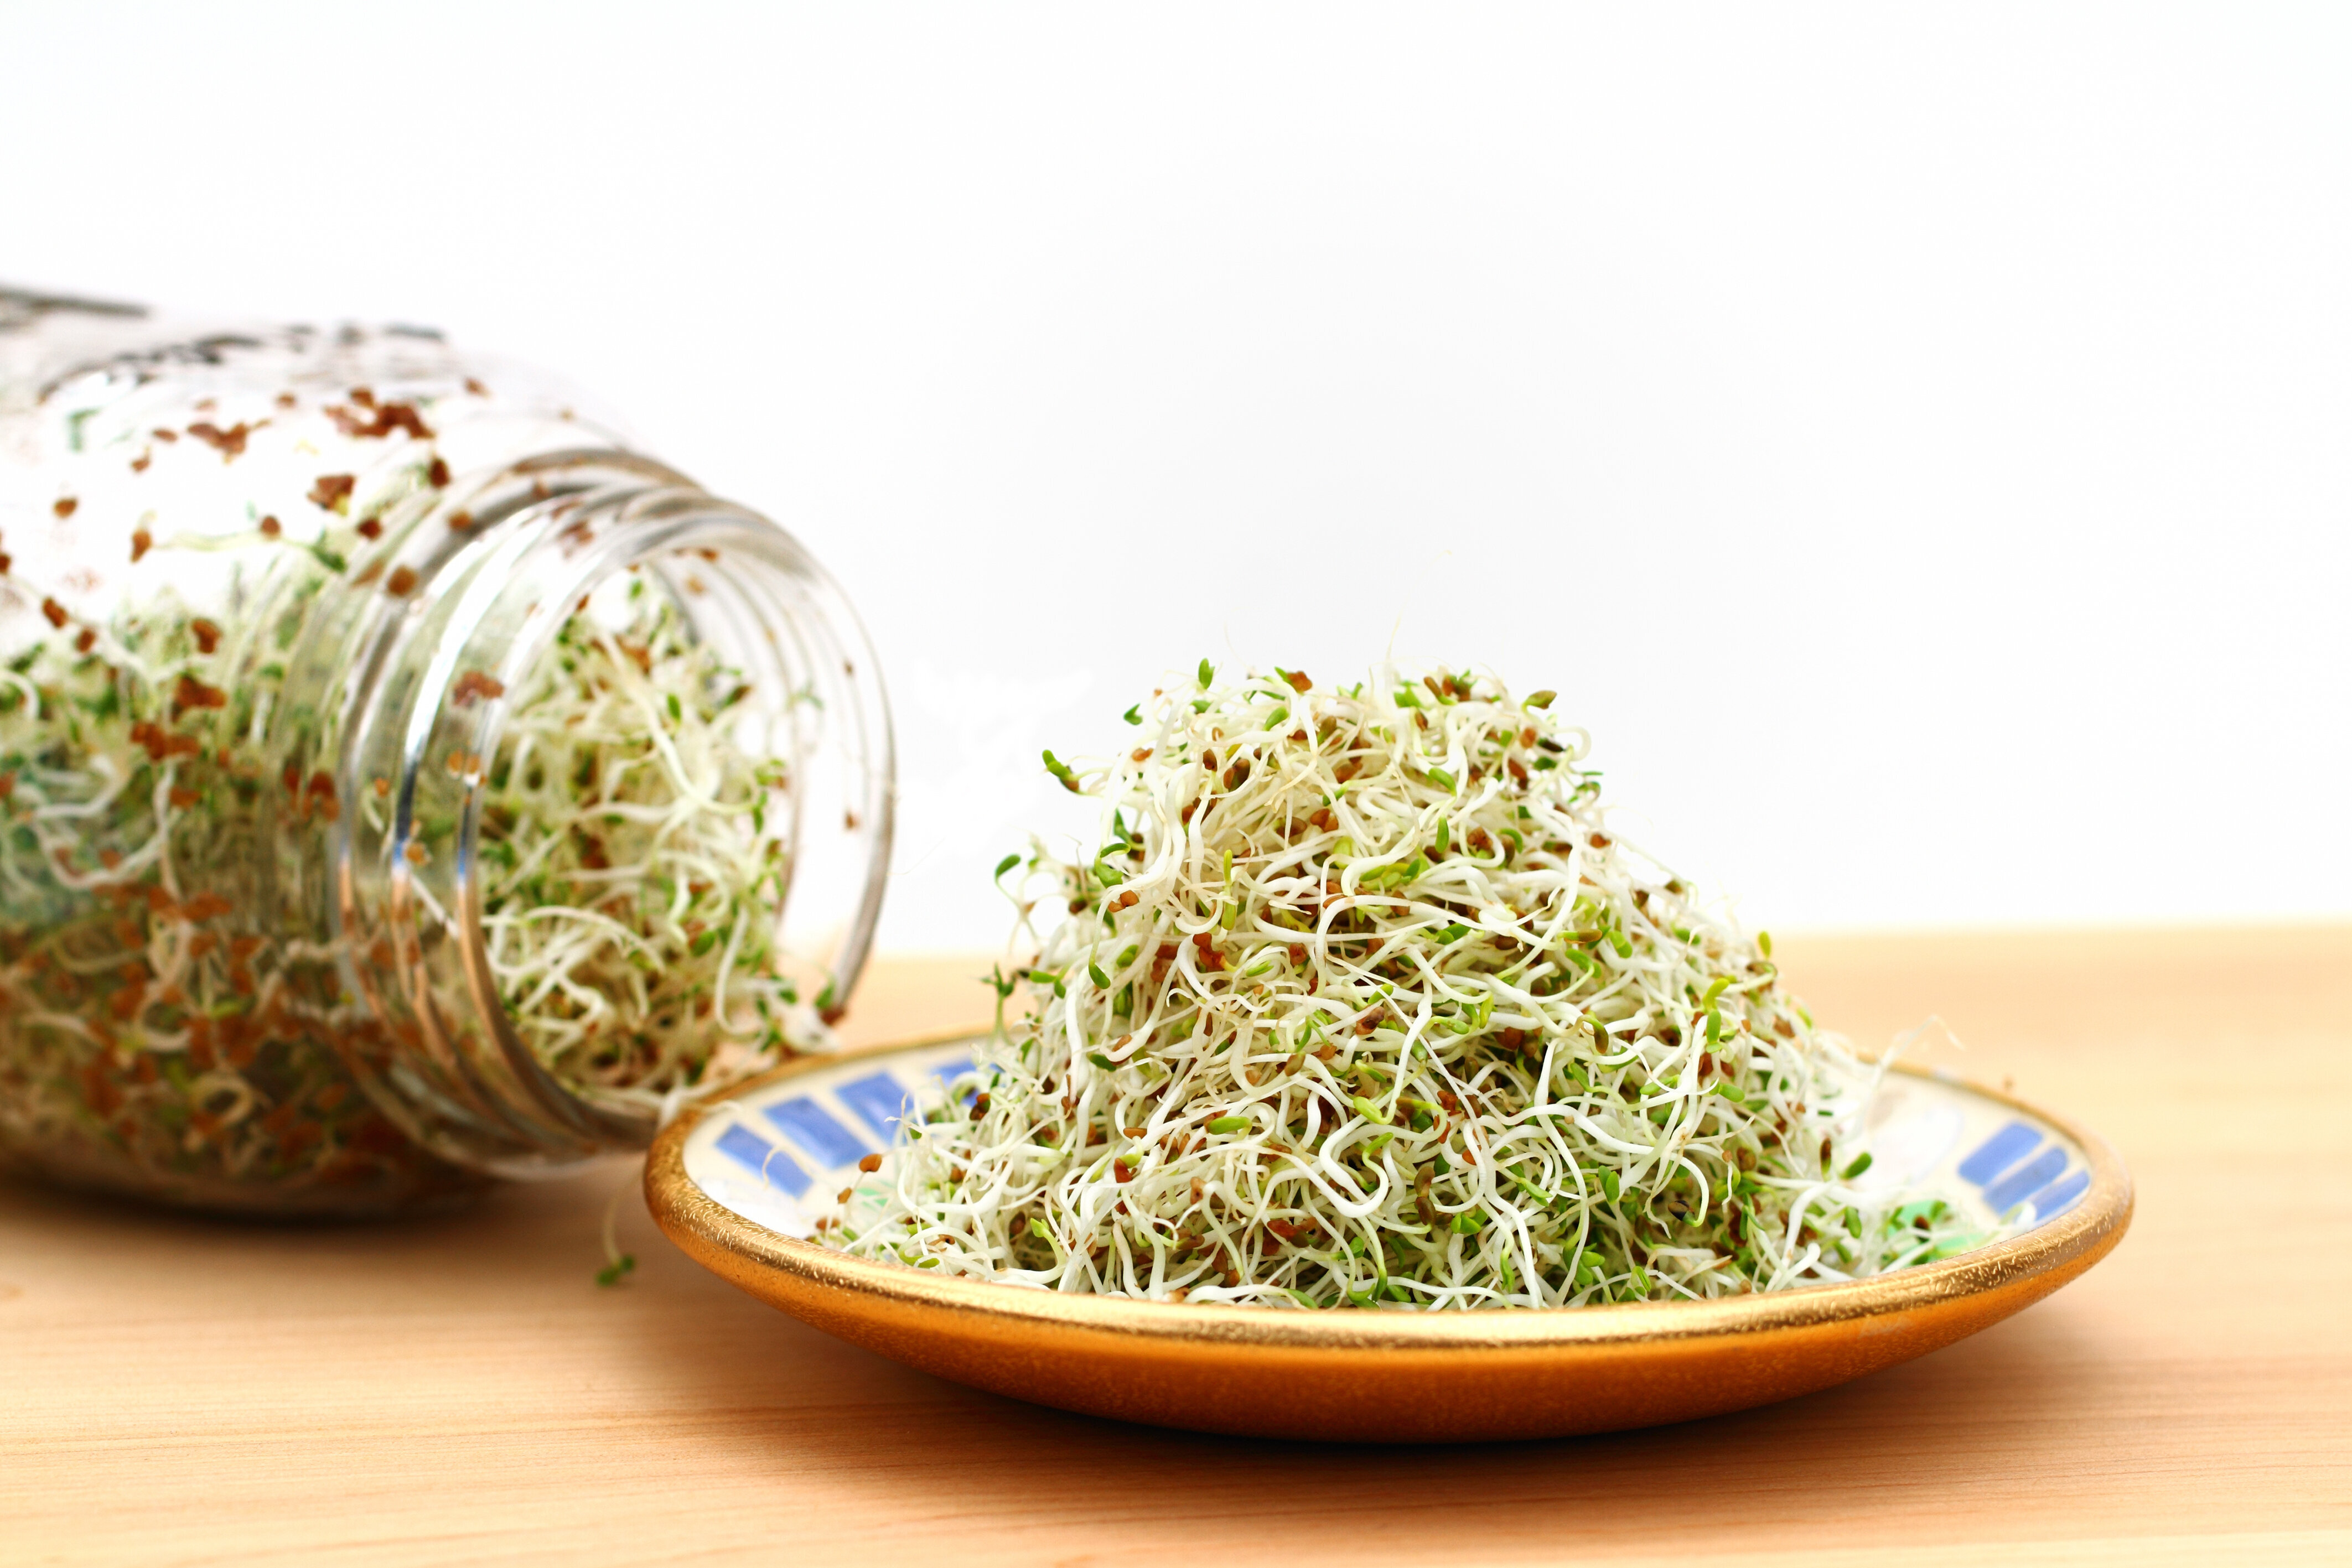 alfalfa sprouts on a plate